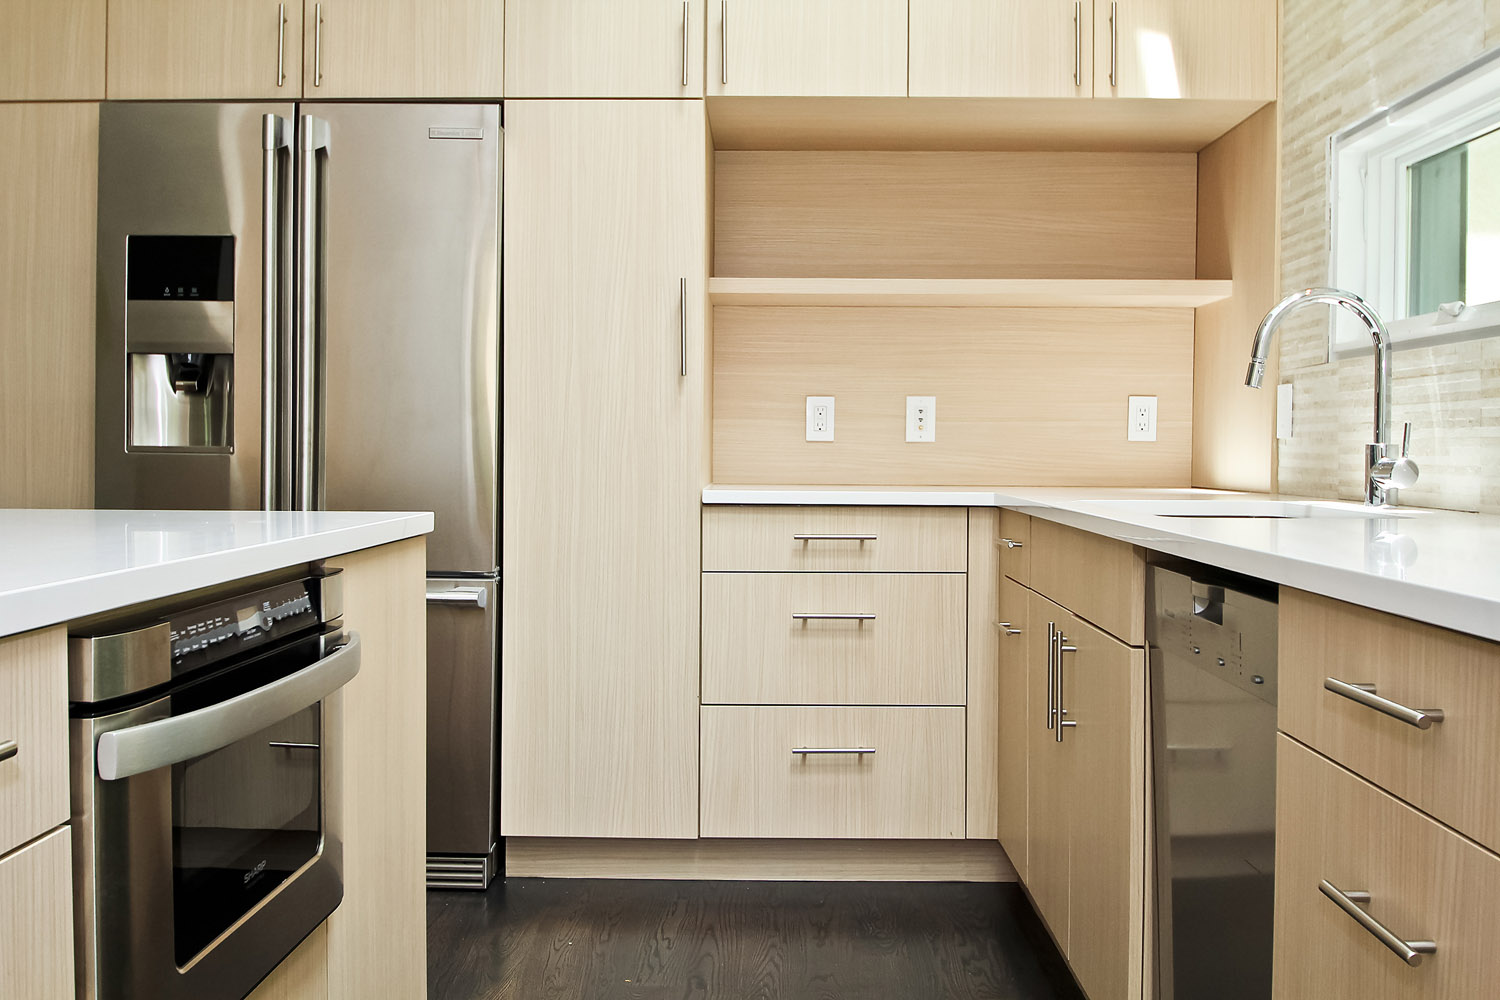 Scandinavian style sand-colored cabinets and modern appliances in a newly renovated kitchen